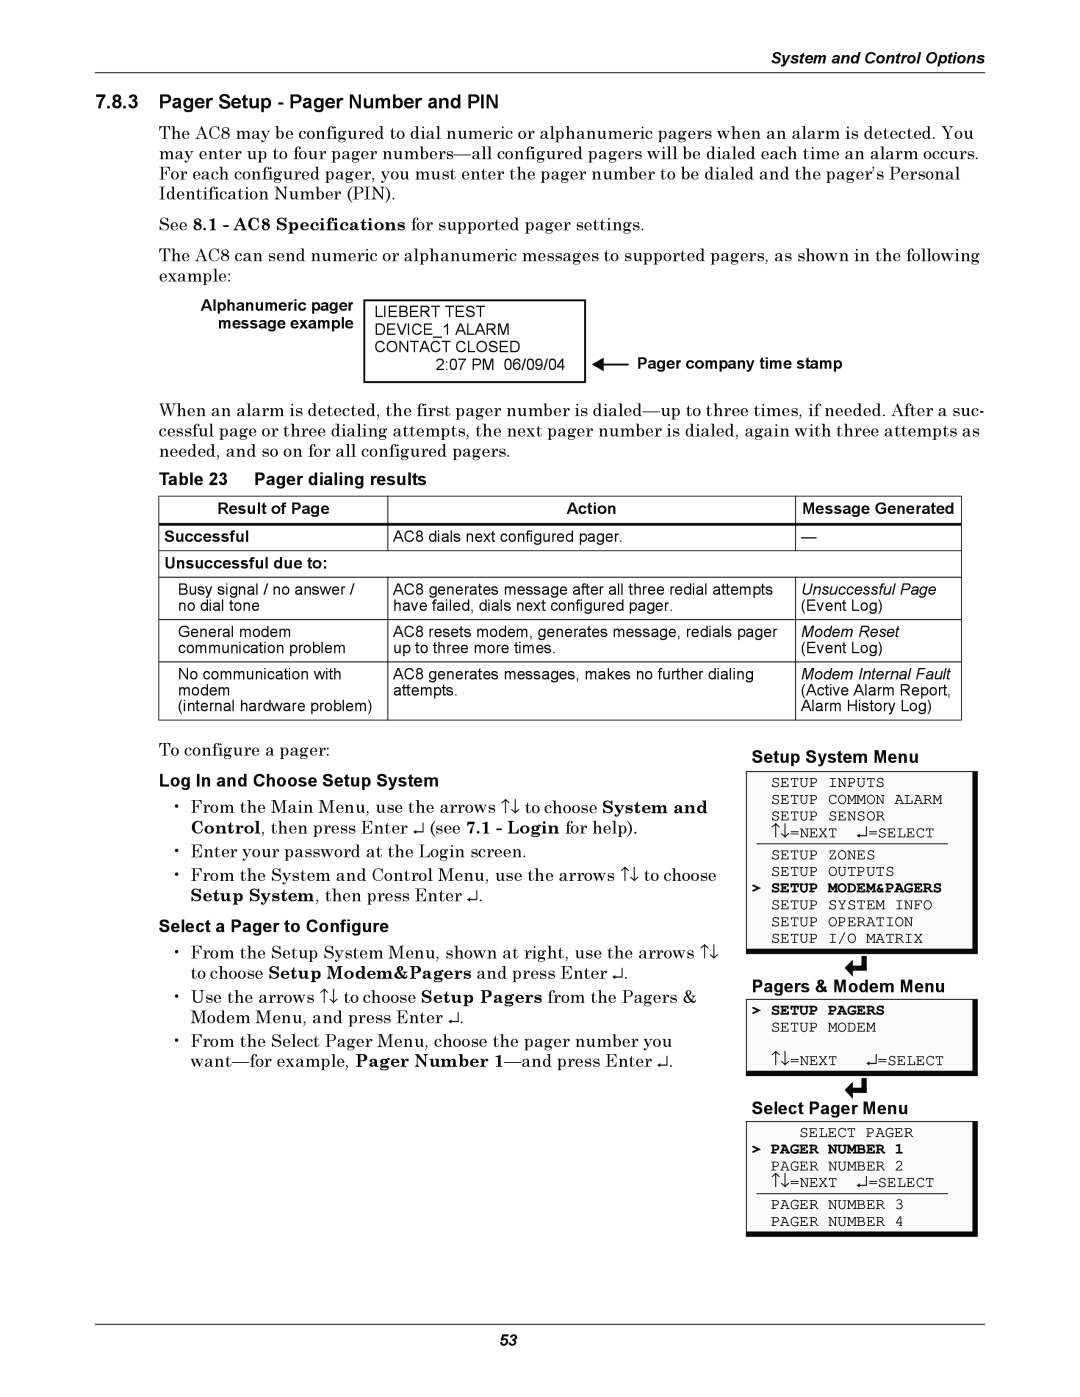 Emerson AC8 user manual 7.8.3Pager Setup - Pager Number and PIN, Pager dialing results, Log In and Choose Setup System 